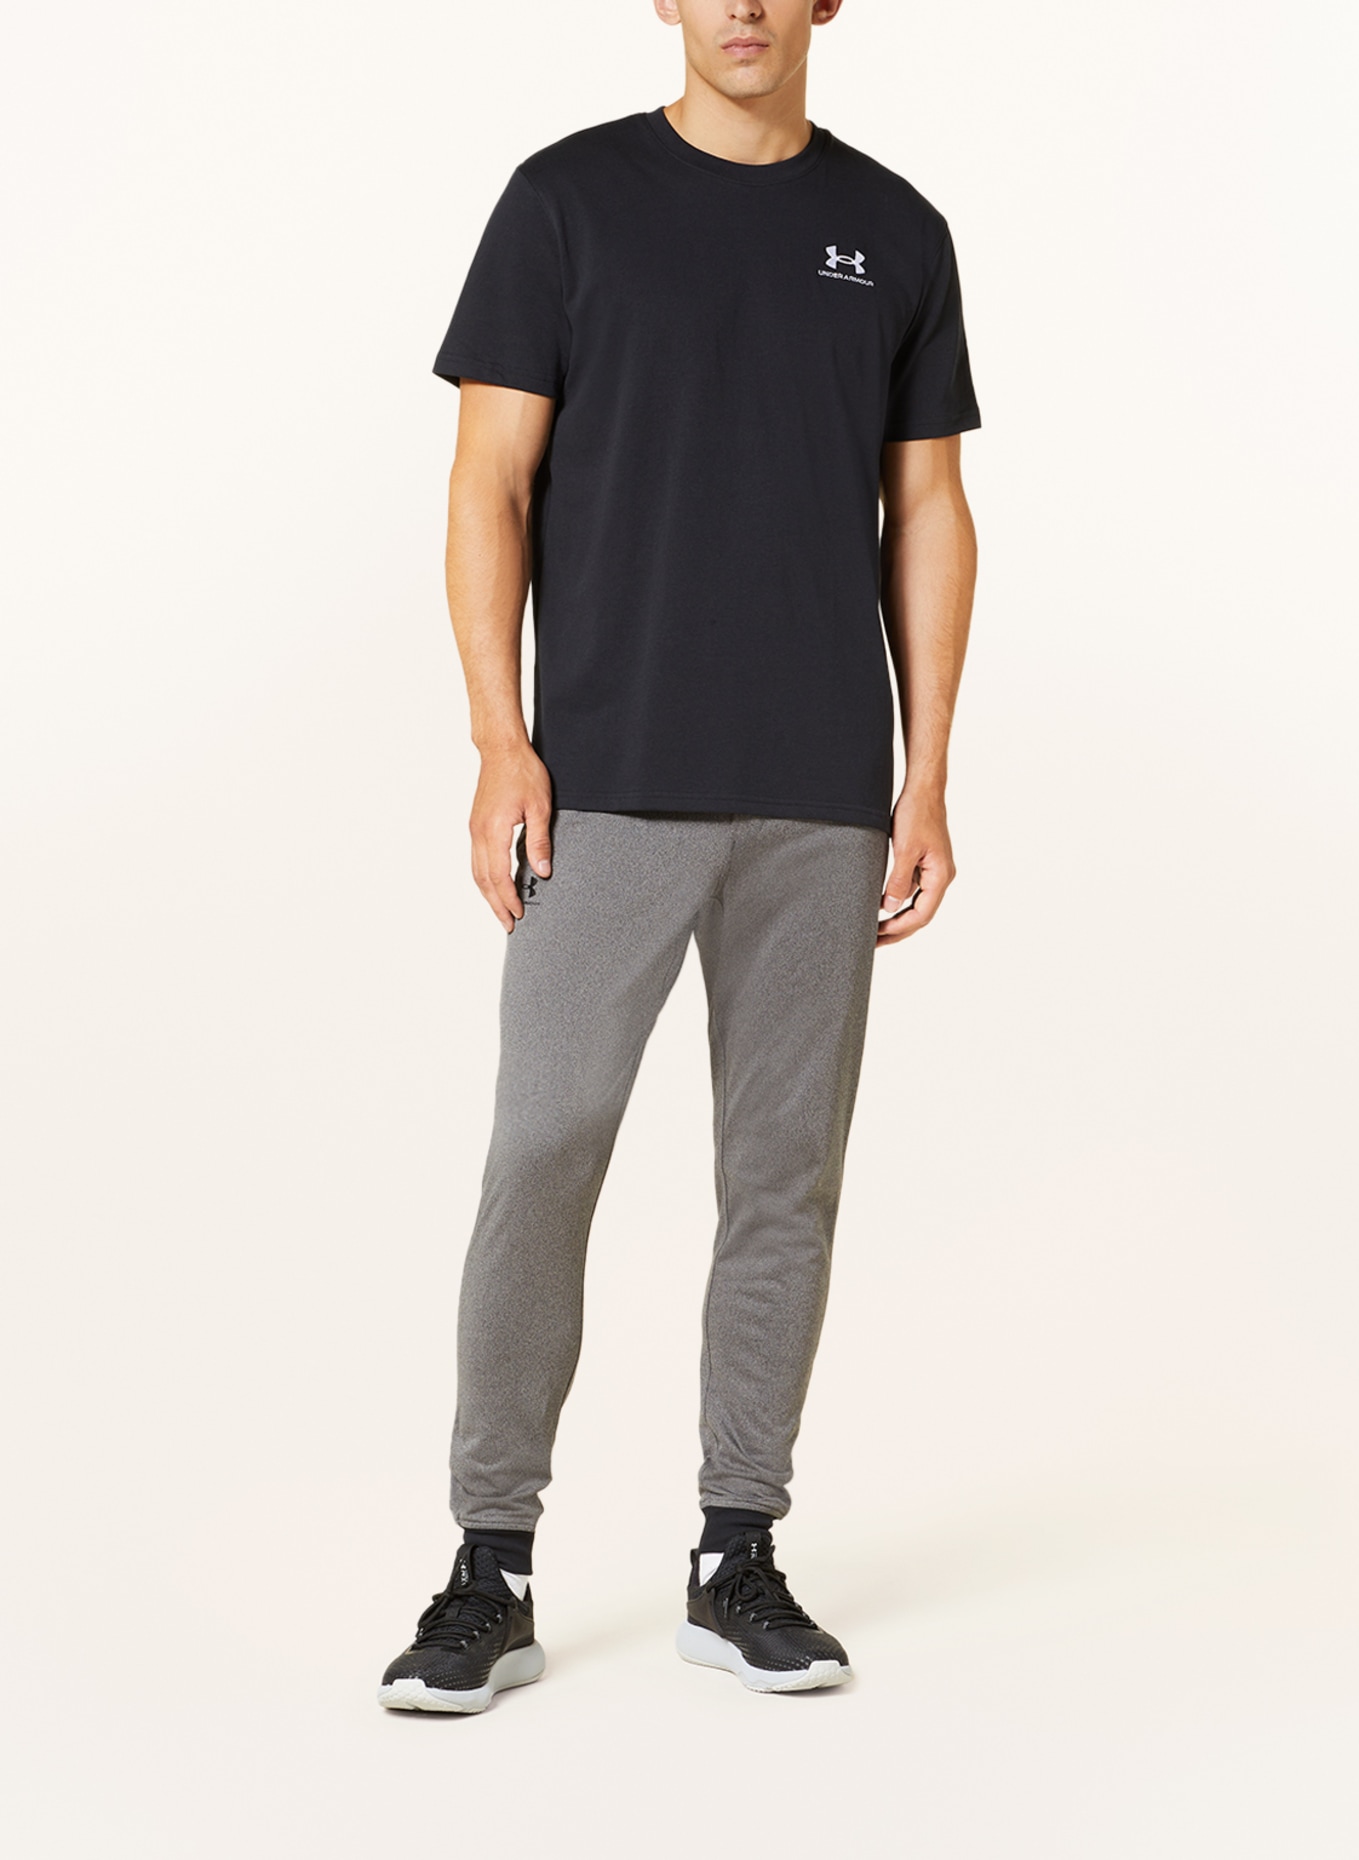 UNDER ARMOUR T-shirt HEAVYWEIGHT, Color: BLACK (Image 2)